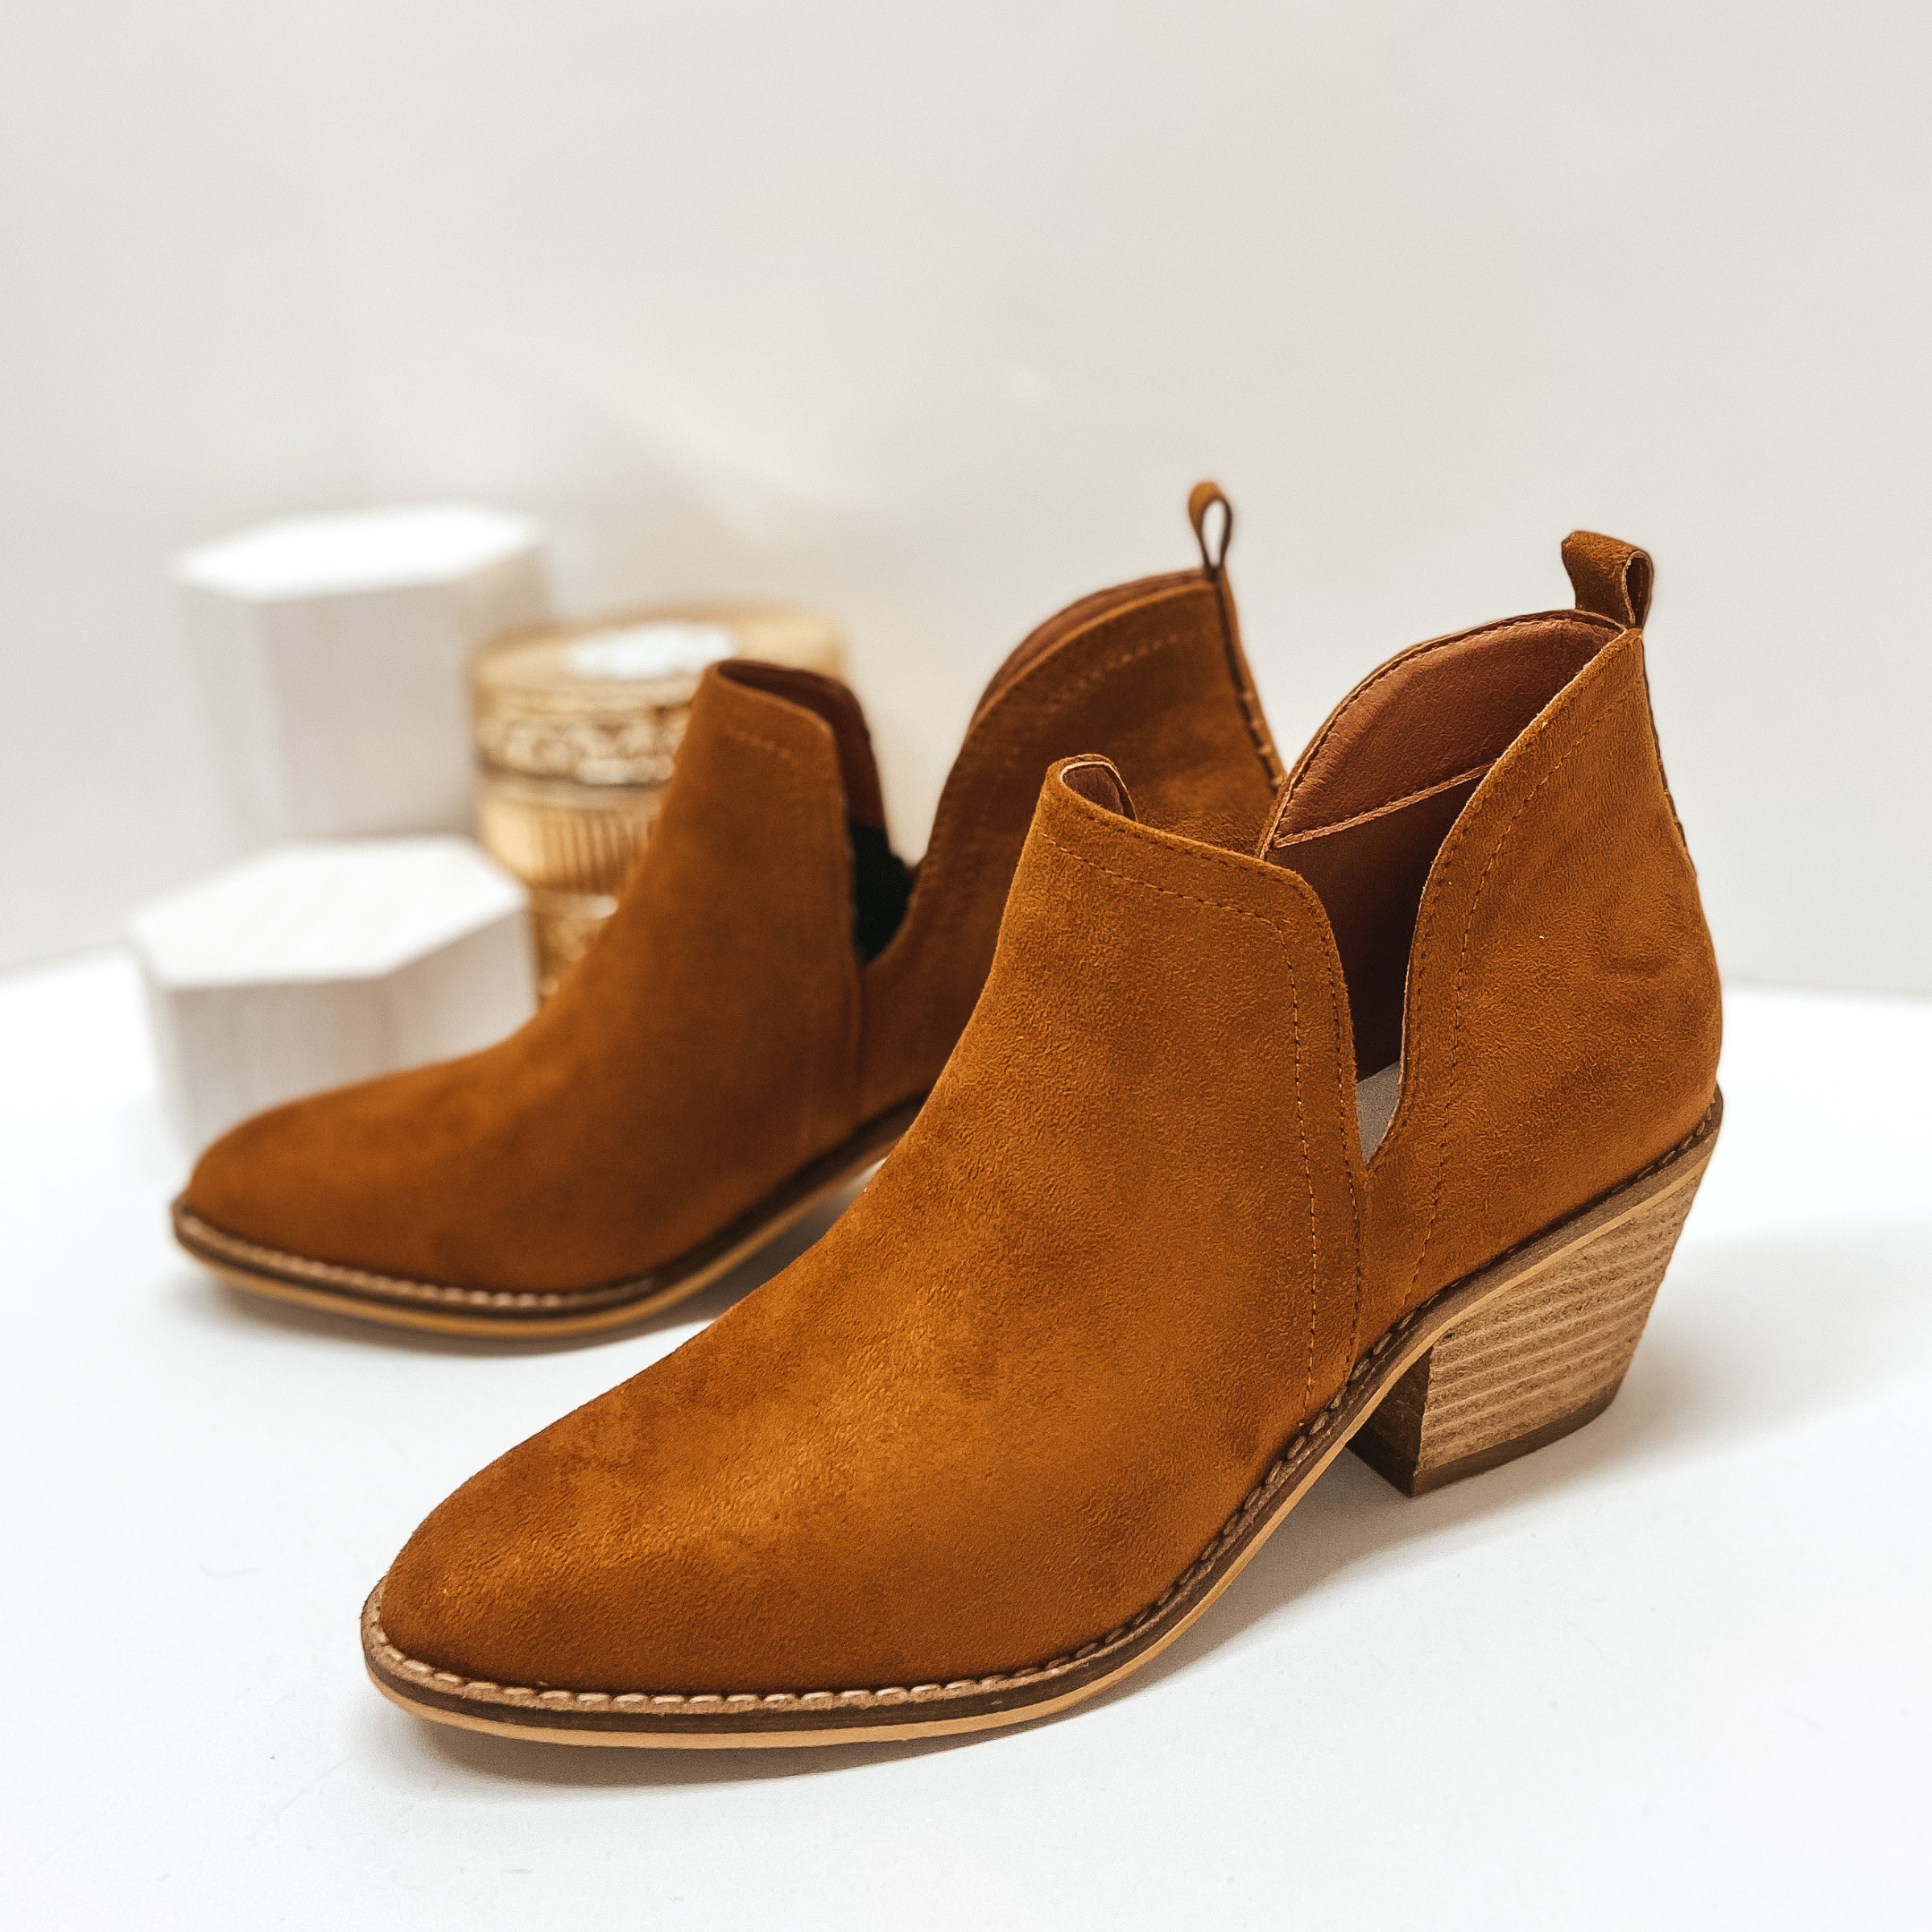 Brown booties with ankle skits and heel tab. Pictured on white background.